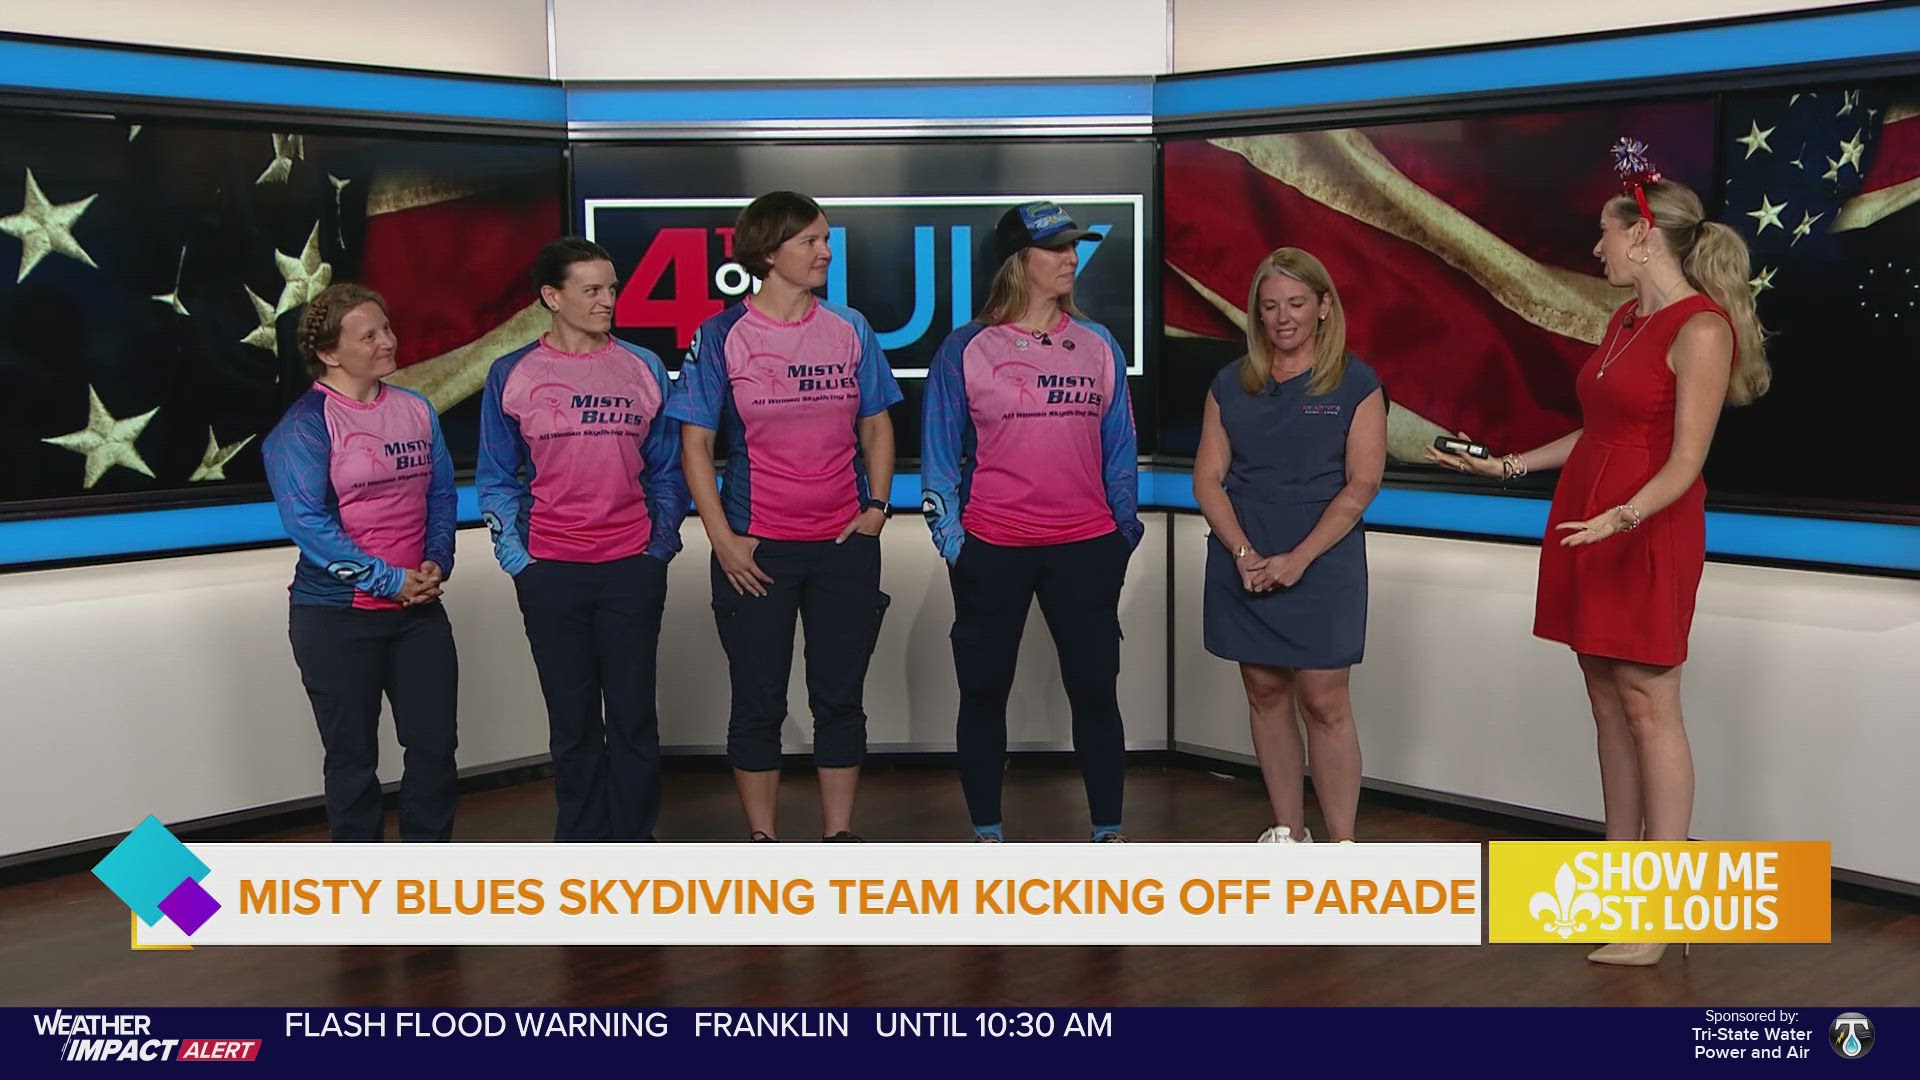 Experience the Celebrate Saint Louis festival this year where you can see the Misty Blues skydiving team.